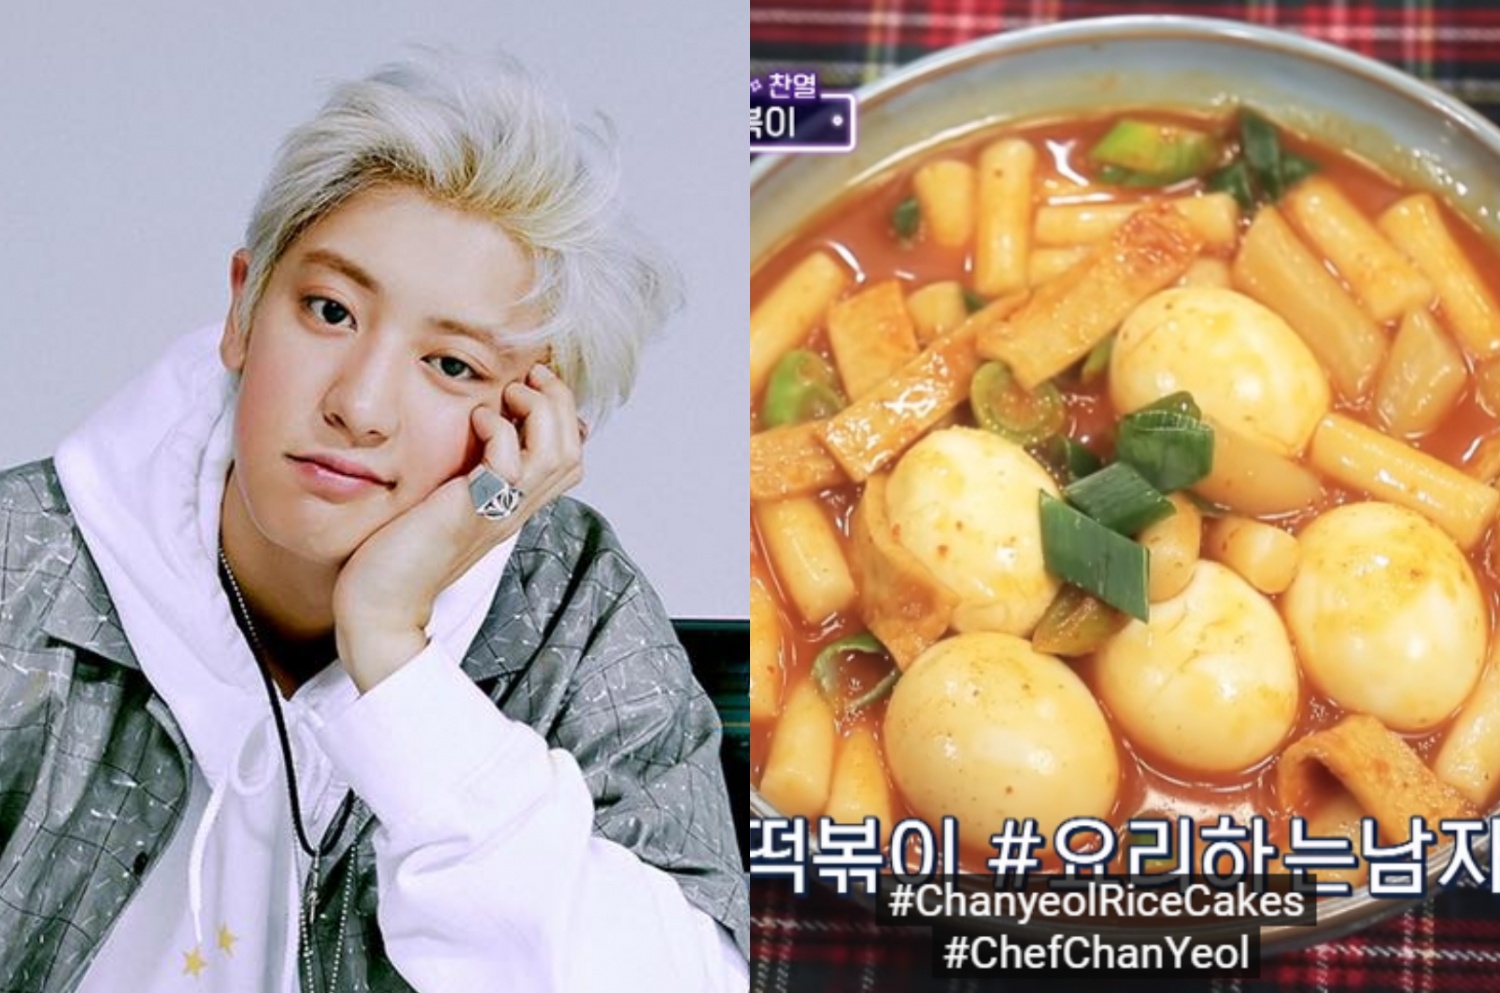 7 K-pop Idol Recipes You Can Play At Home: EXO Chanyeol’s Tteokbokki, more